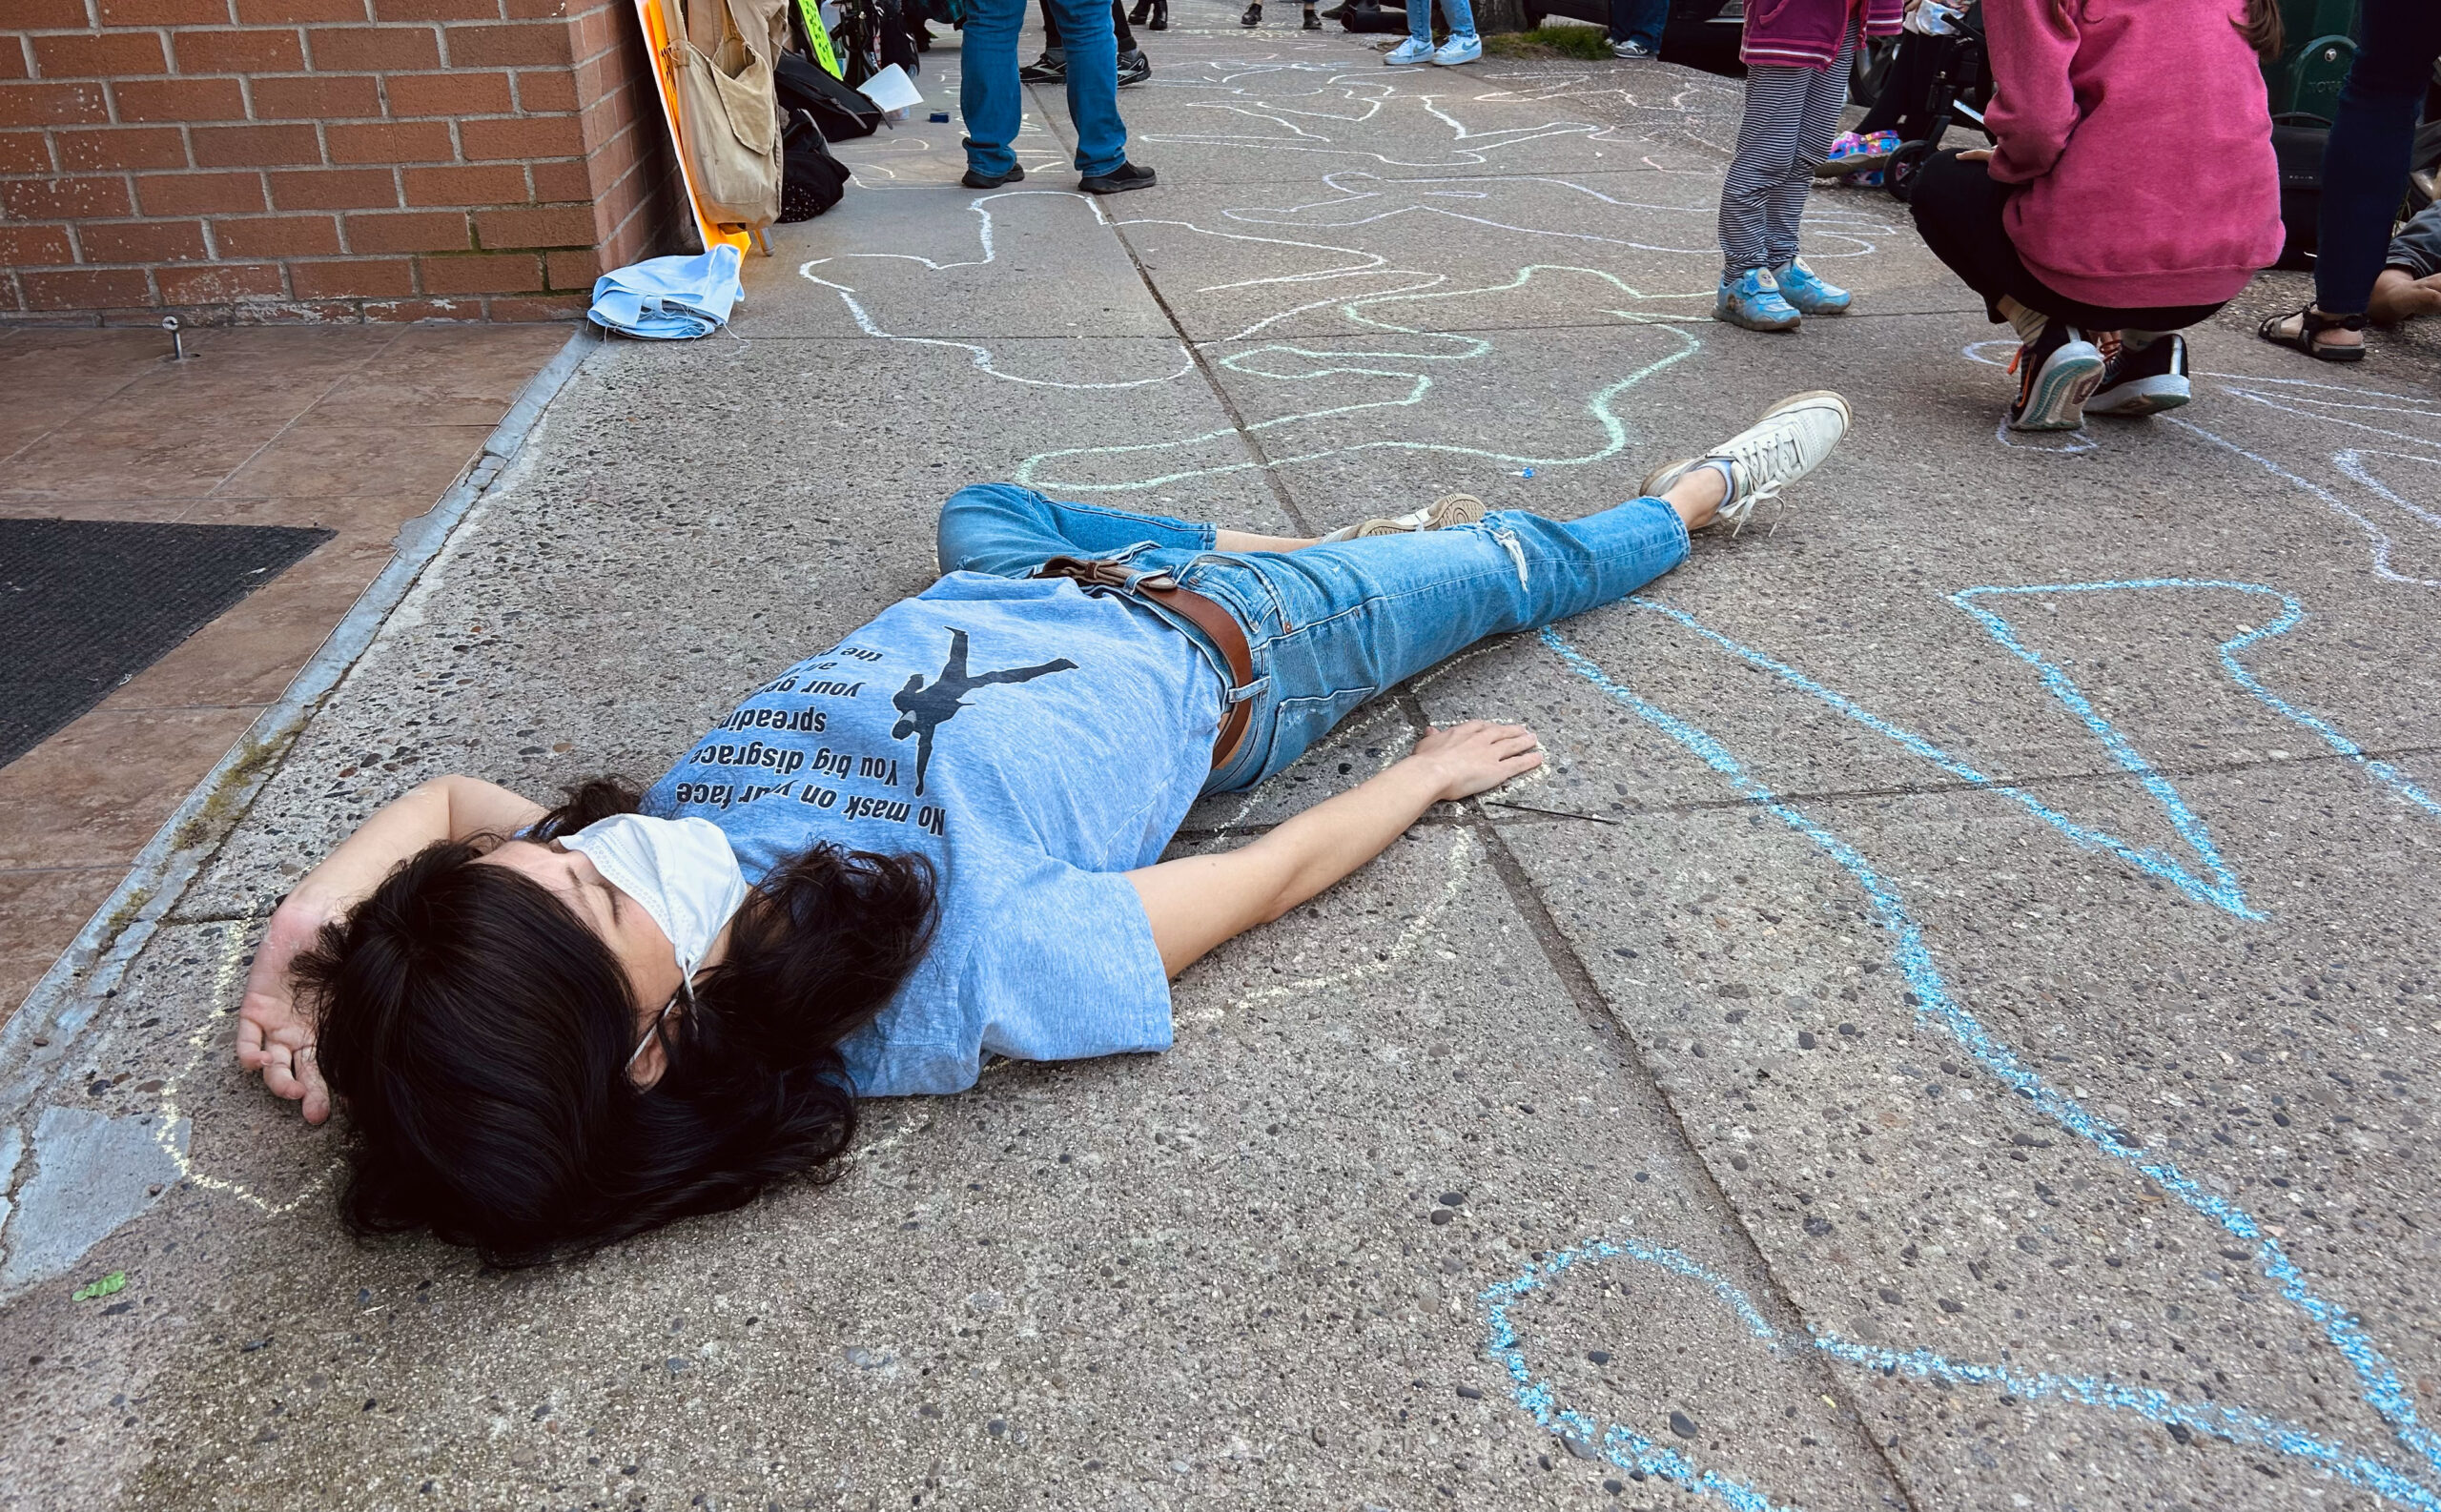 On the pavement in the foreground lies a young protester with shoulder-length brown hair, a blue t-shirt and jeans, and an N95 repirator mask. They lie as if dead, one hand fallen beside their face, surrounded by a chalk body outline. All around them are other chalk body outlines stretching as far as the eye can see. In the corners of image are the feet of standing and crouching protesters.